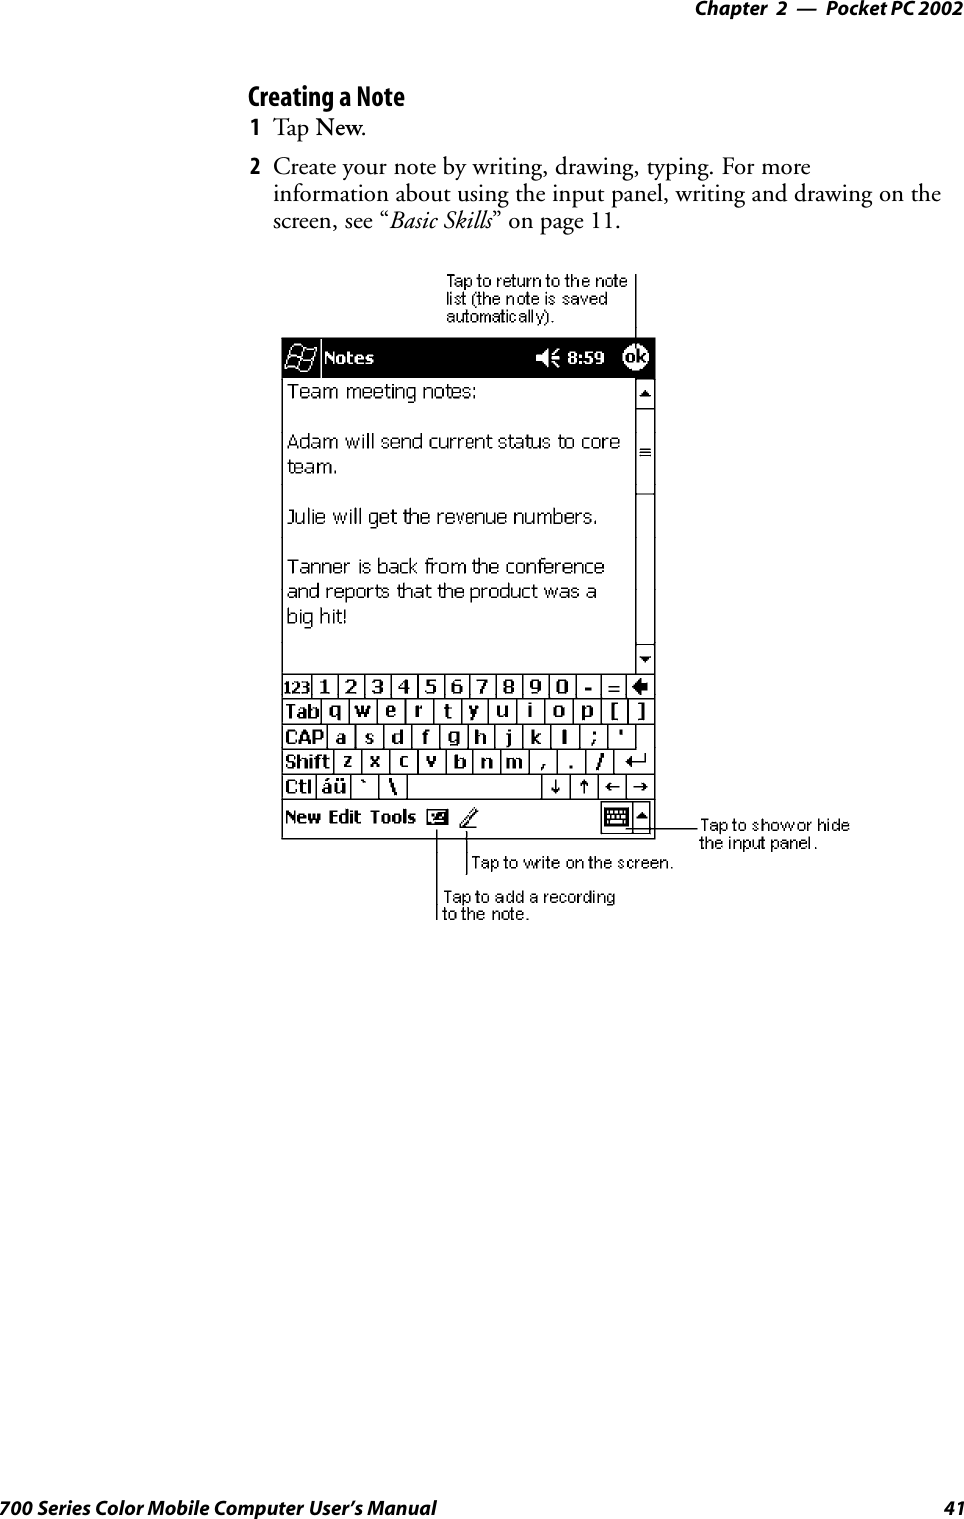 Pocket PC 2002—Chapter 241700 Series Color Mobile Computer User’s ManualCreating a Note1Tap New.2 Create your note by writing, drawing, typing. For moreinformation about using the input panel, writing and drawing on thescreen, see “Basic Skills” on page 11.